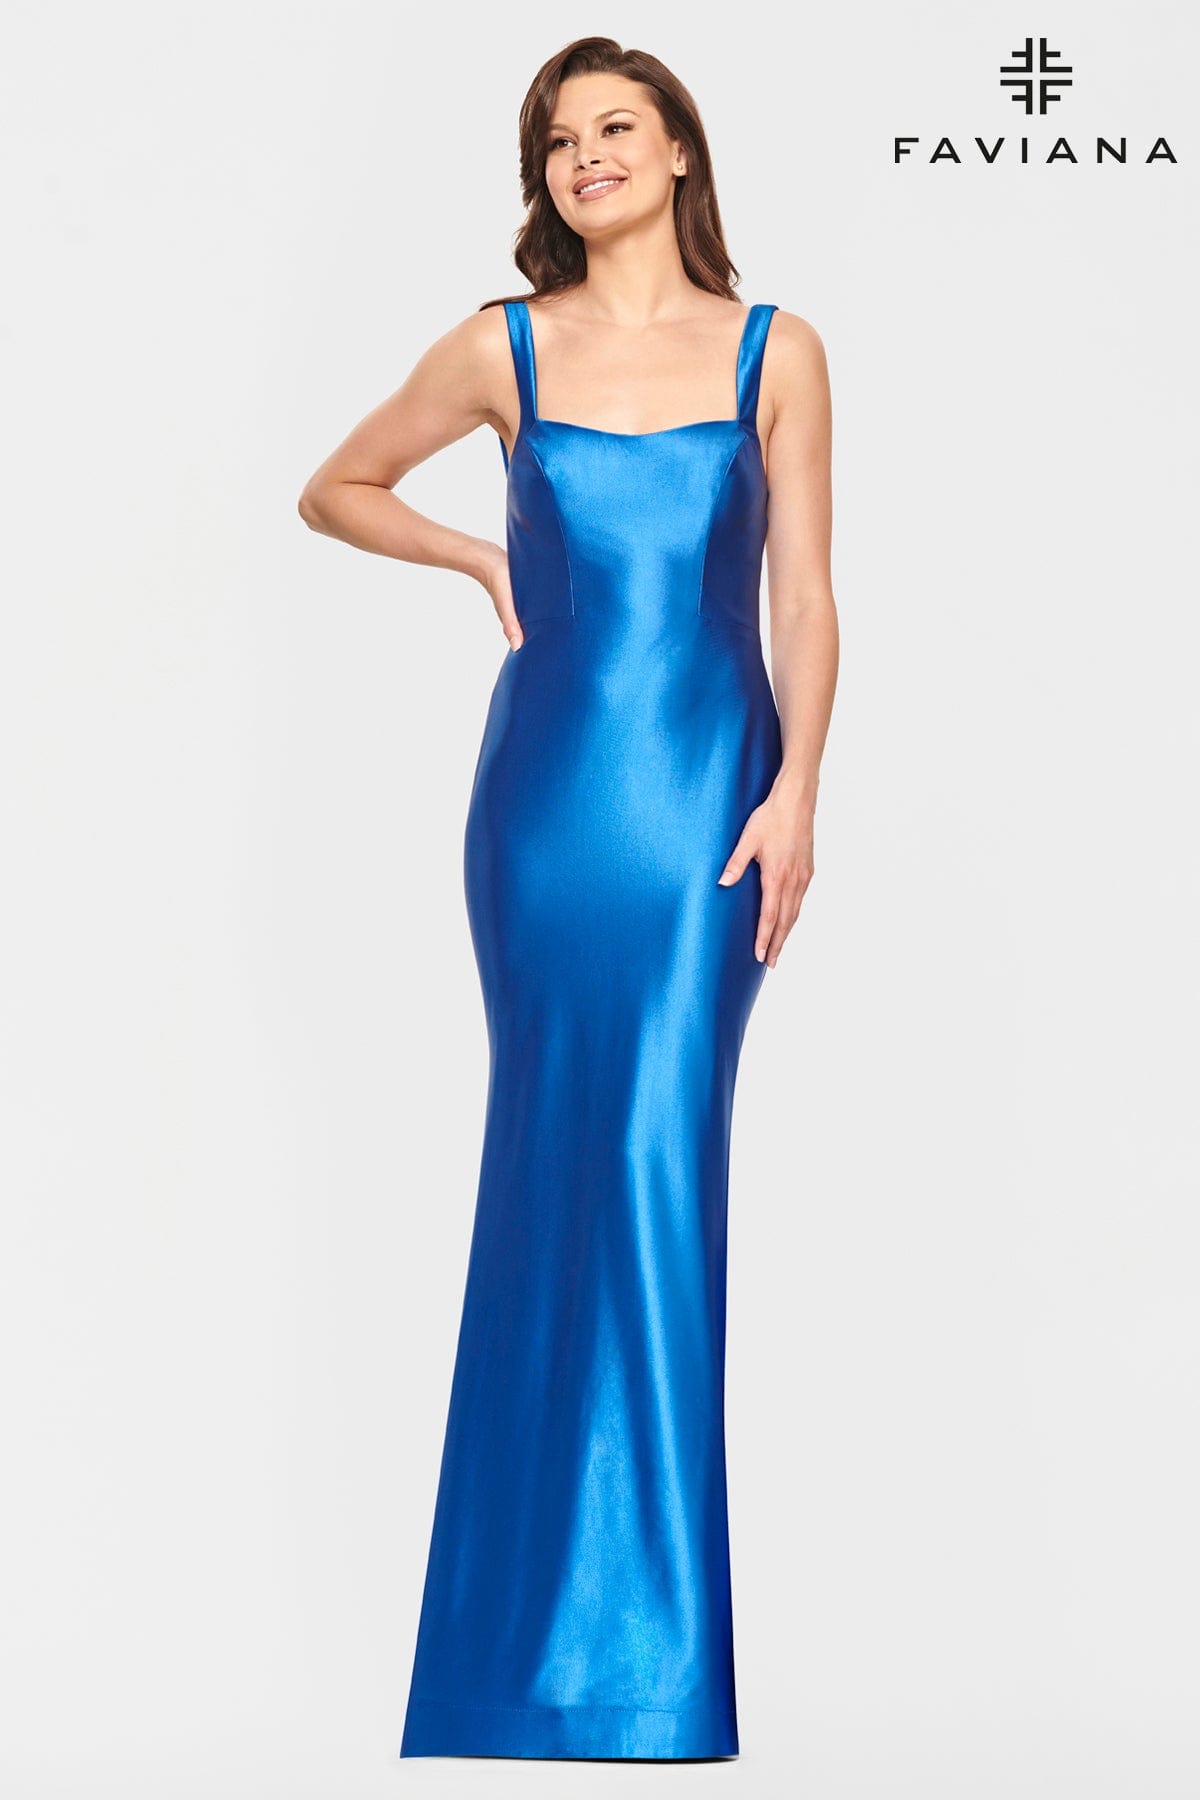 Cobalt Blue Satin Scoop Neck Dress With Strappy Open Back Detailing And Fit And Flare Skirt